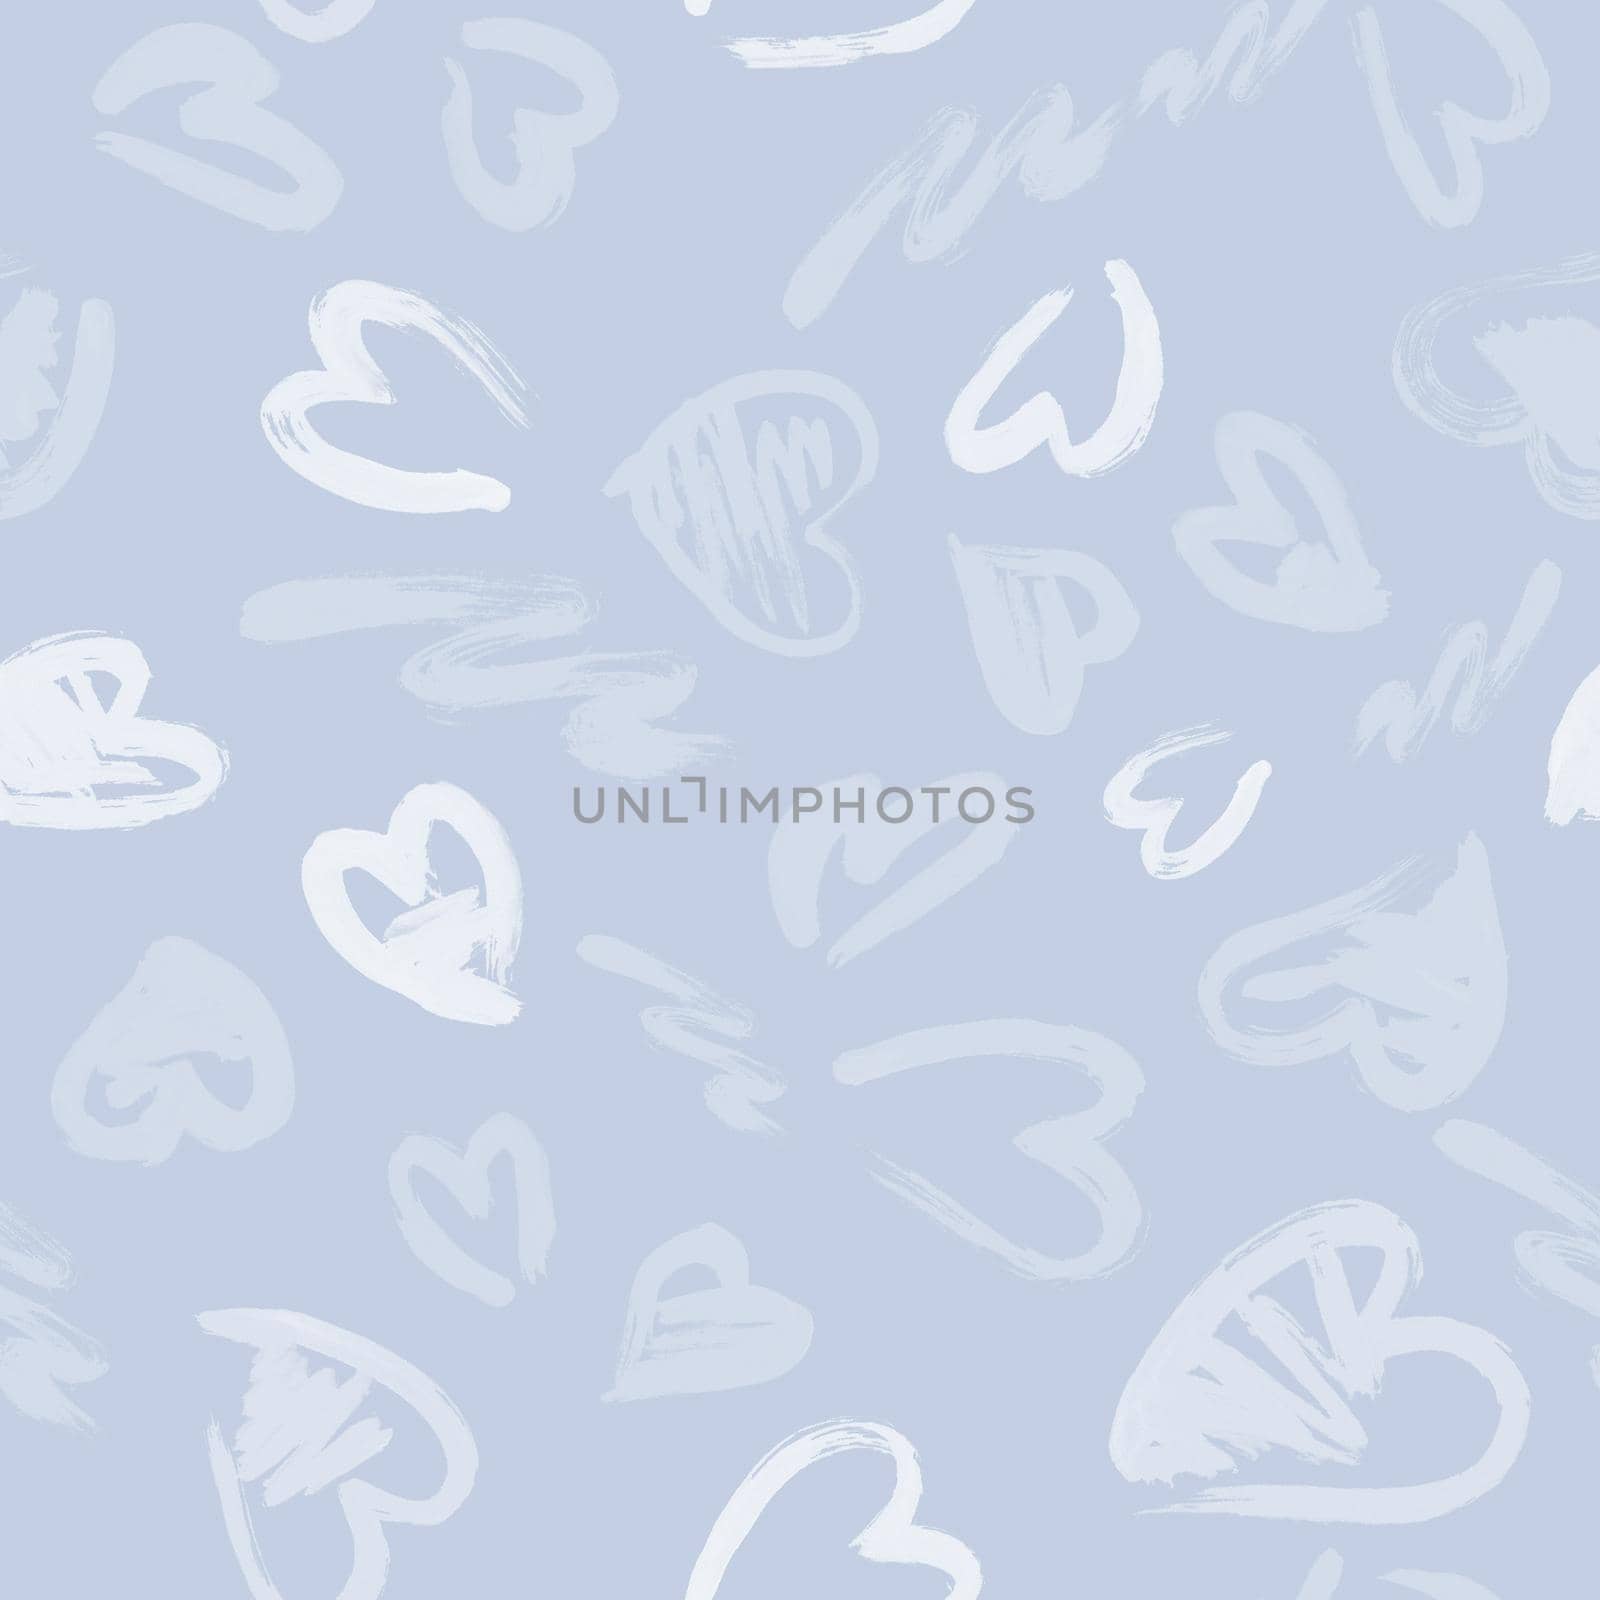 Hand drawn texture. Hearts, brush strokes, seamless pattern made with ink. by fireFLYart